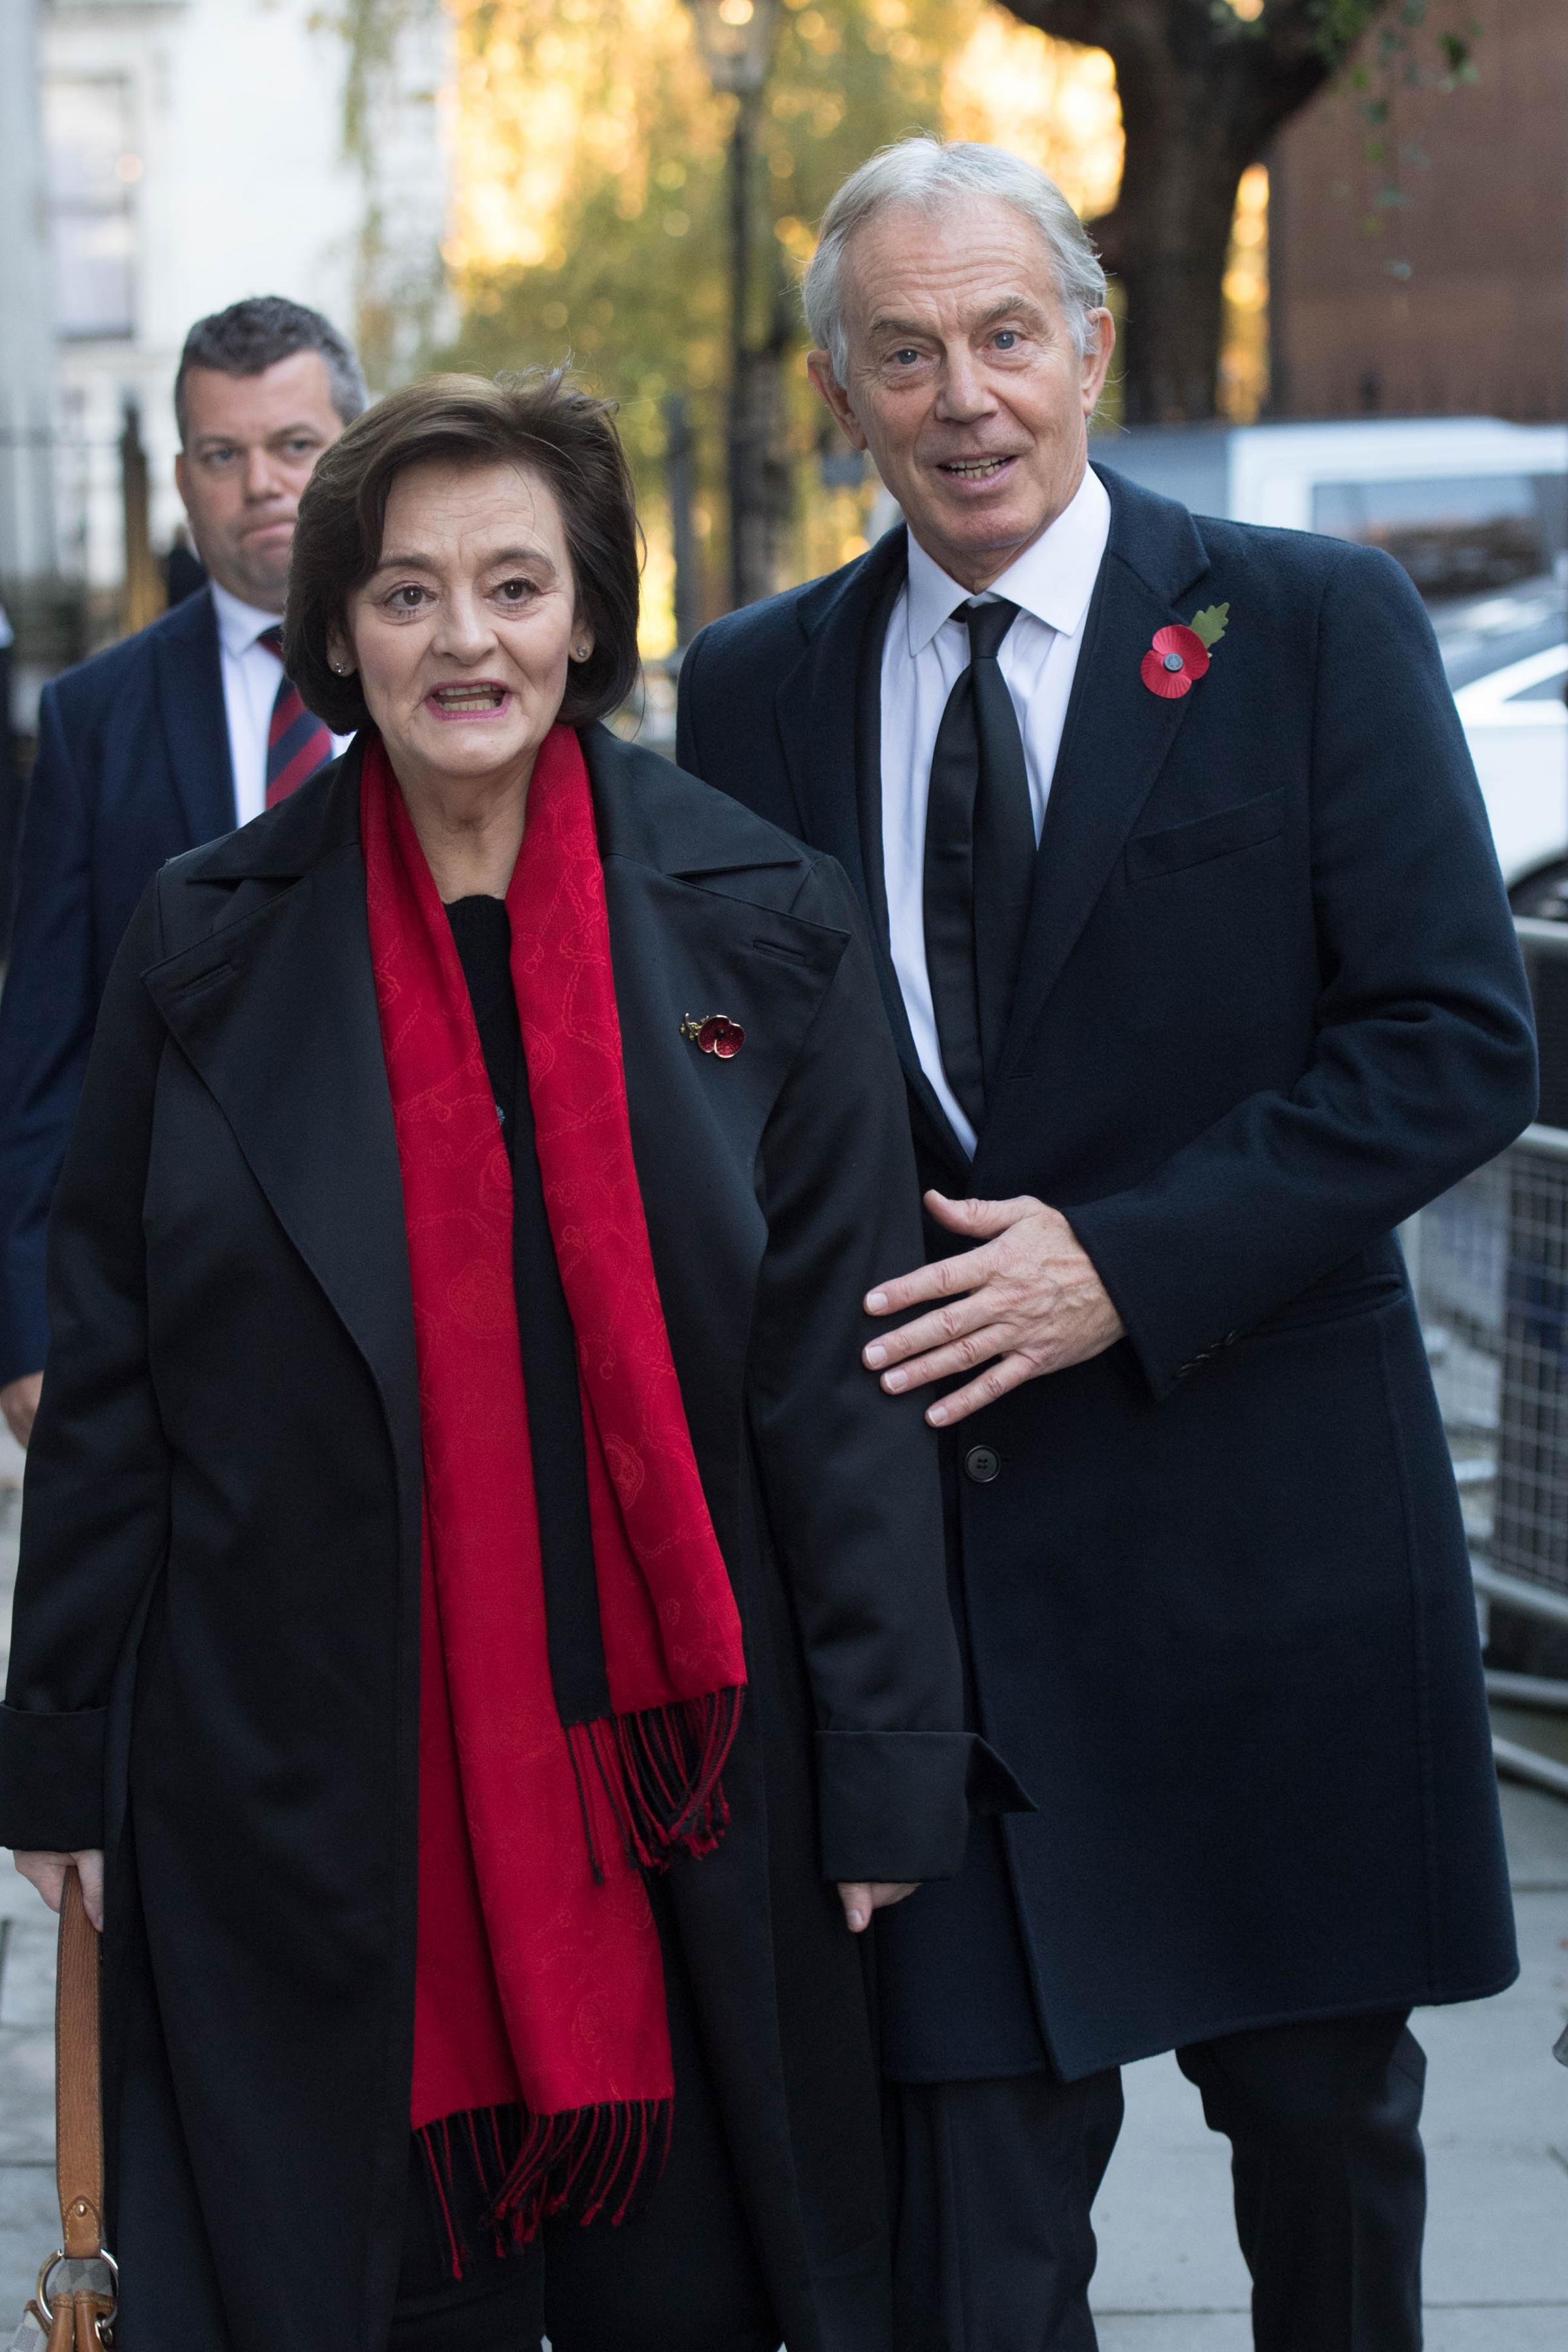 Tony and Cherie Blair saved hundreds of thousands of pounds in property taxes when they bought a London office building worth £6.5m from an offshore company 